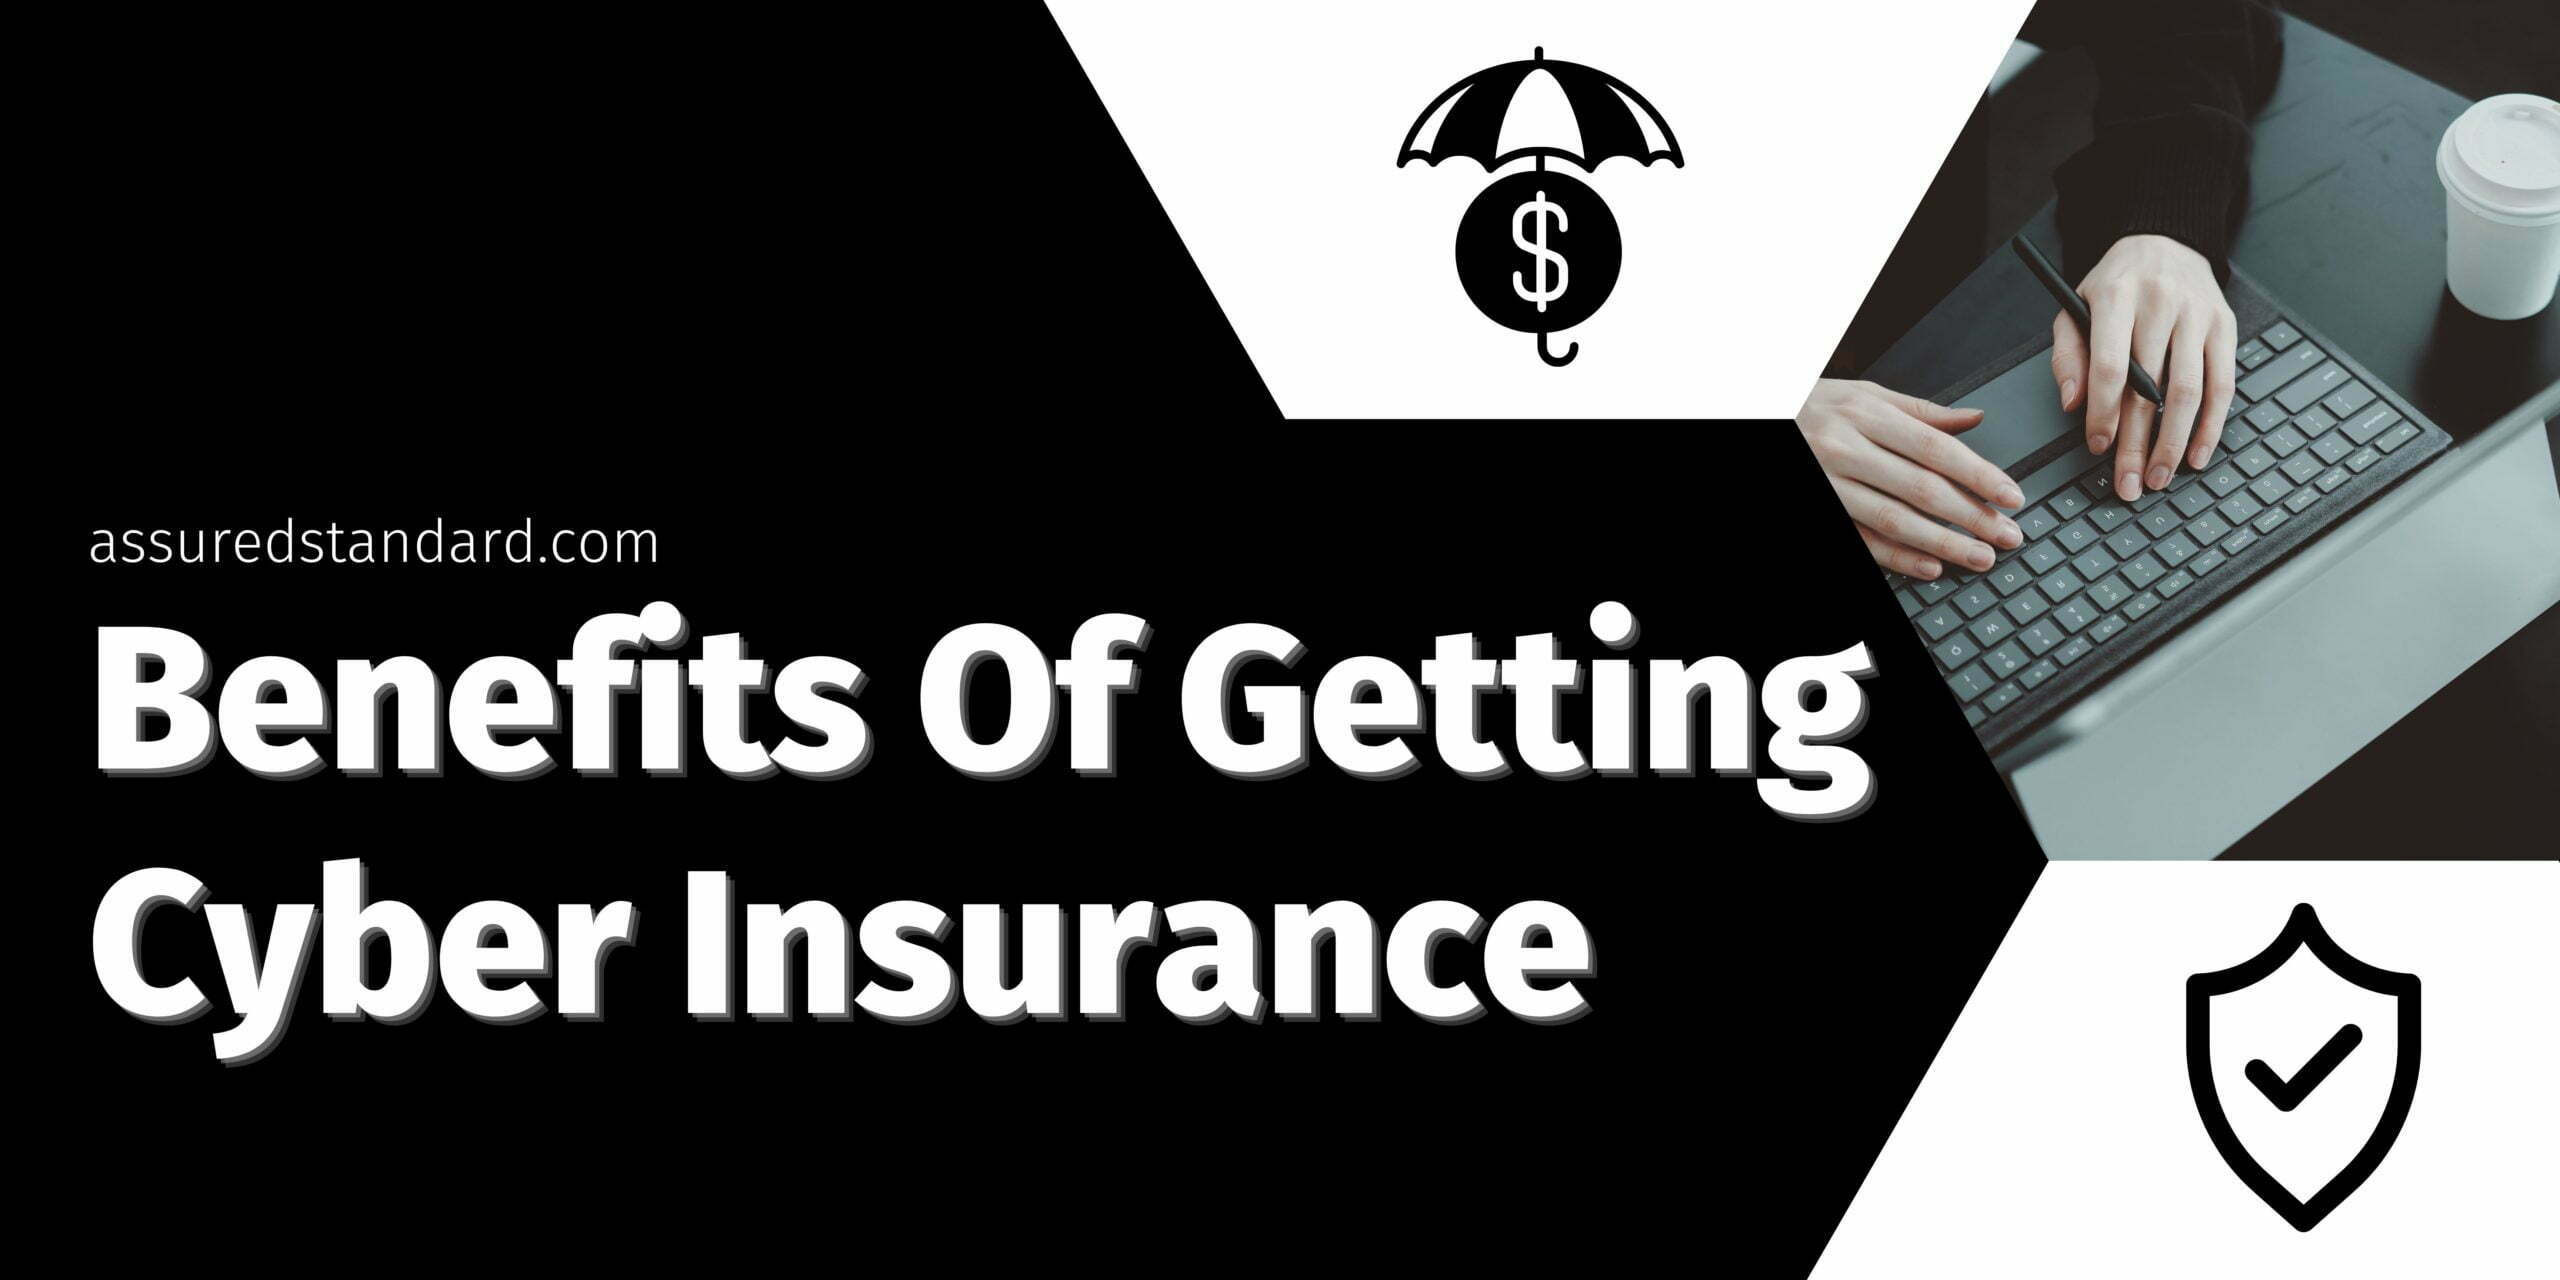 Benefits Of Getting Cyber Insurance